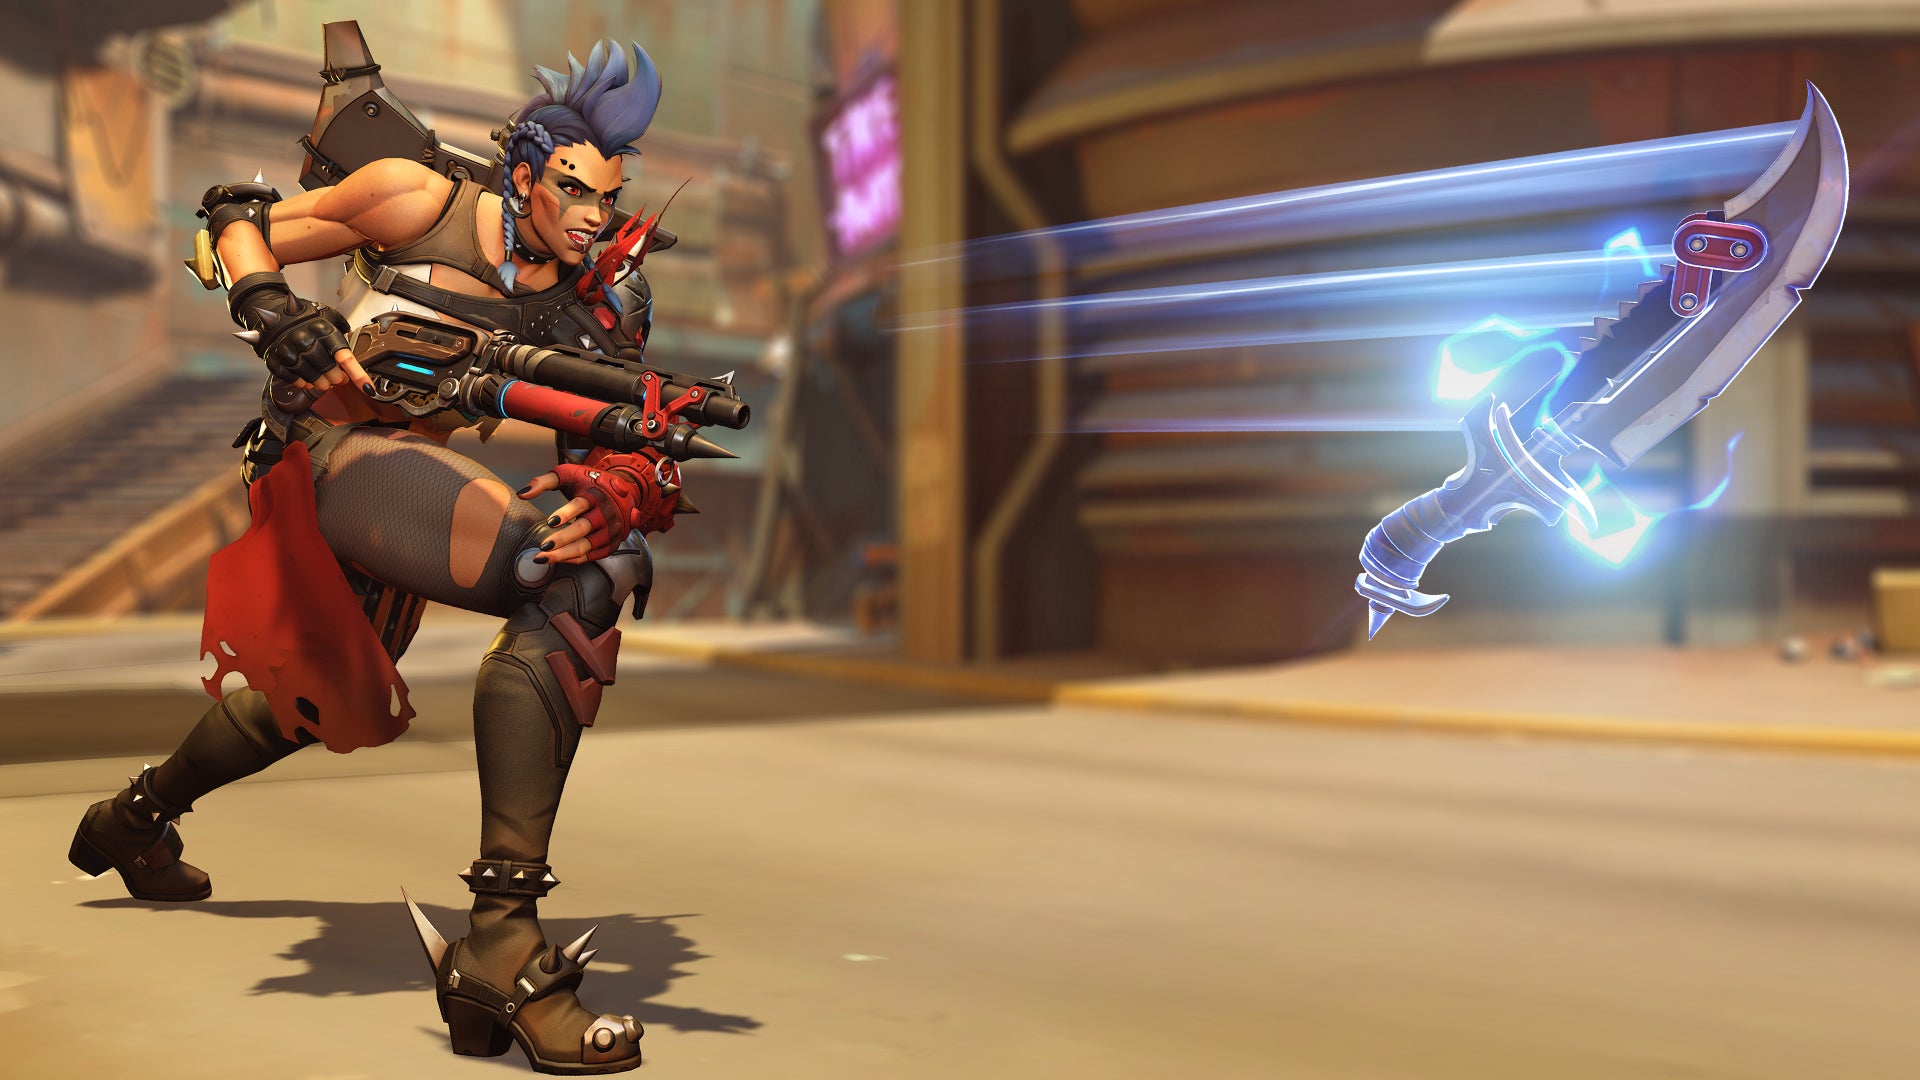 Junker Queen, a hero in Overwatch 2, throws her knife and races after it holding her shotgun.